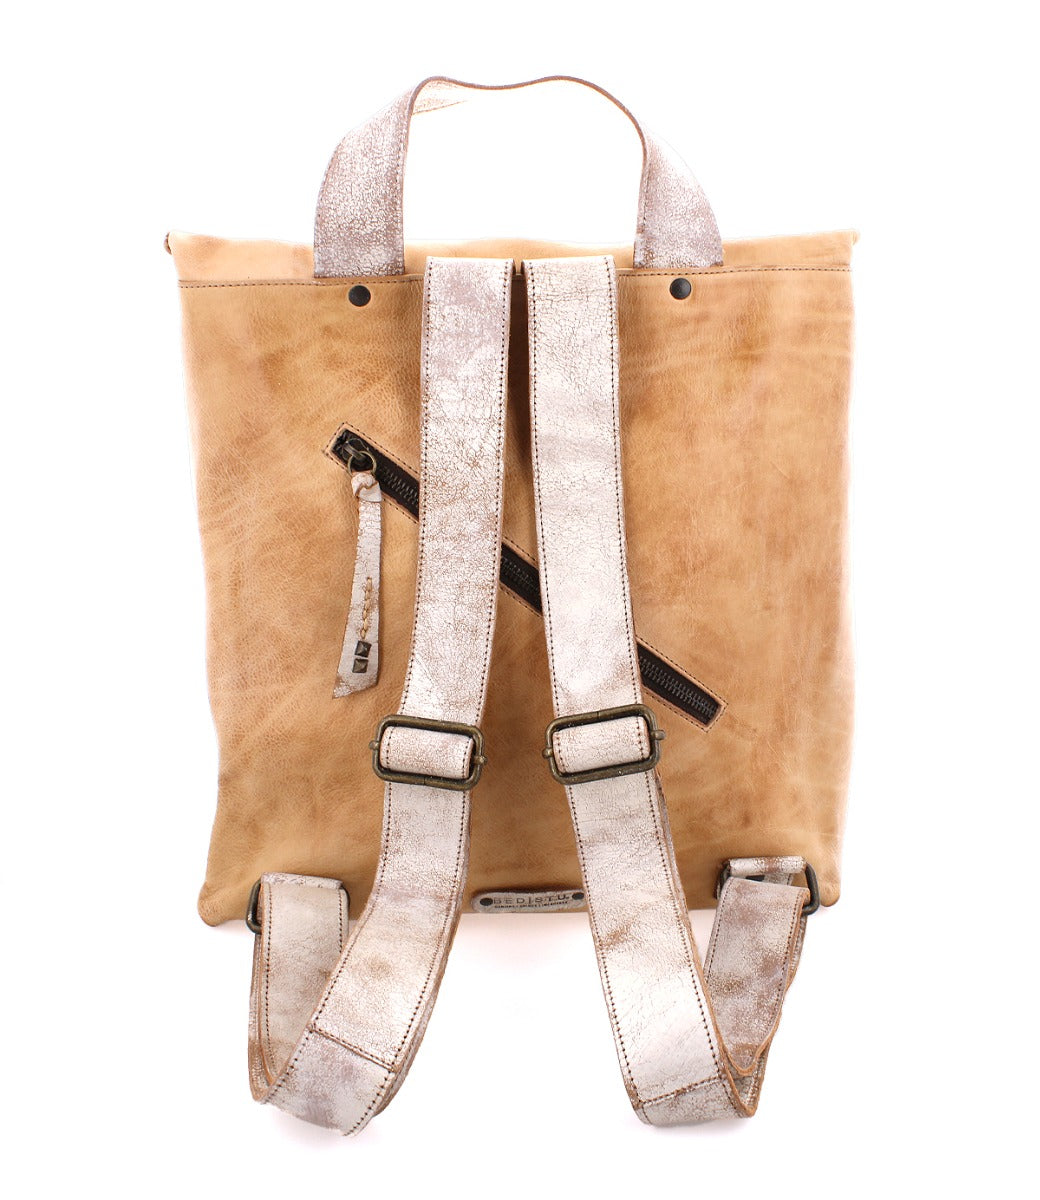 A beige leather Howie backpack with zippers and straps, made by Bed Stu.